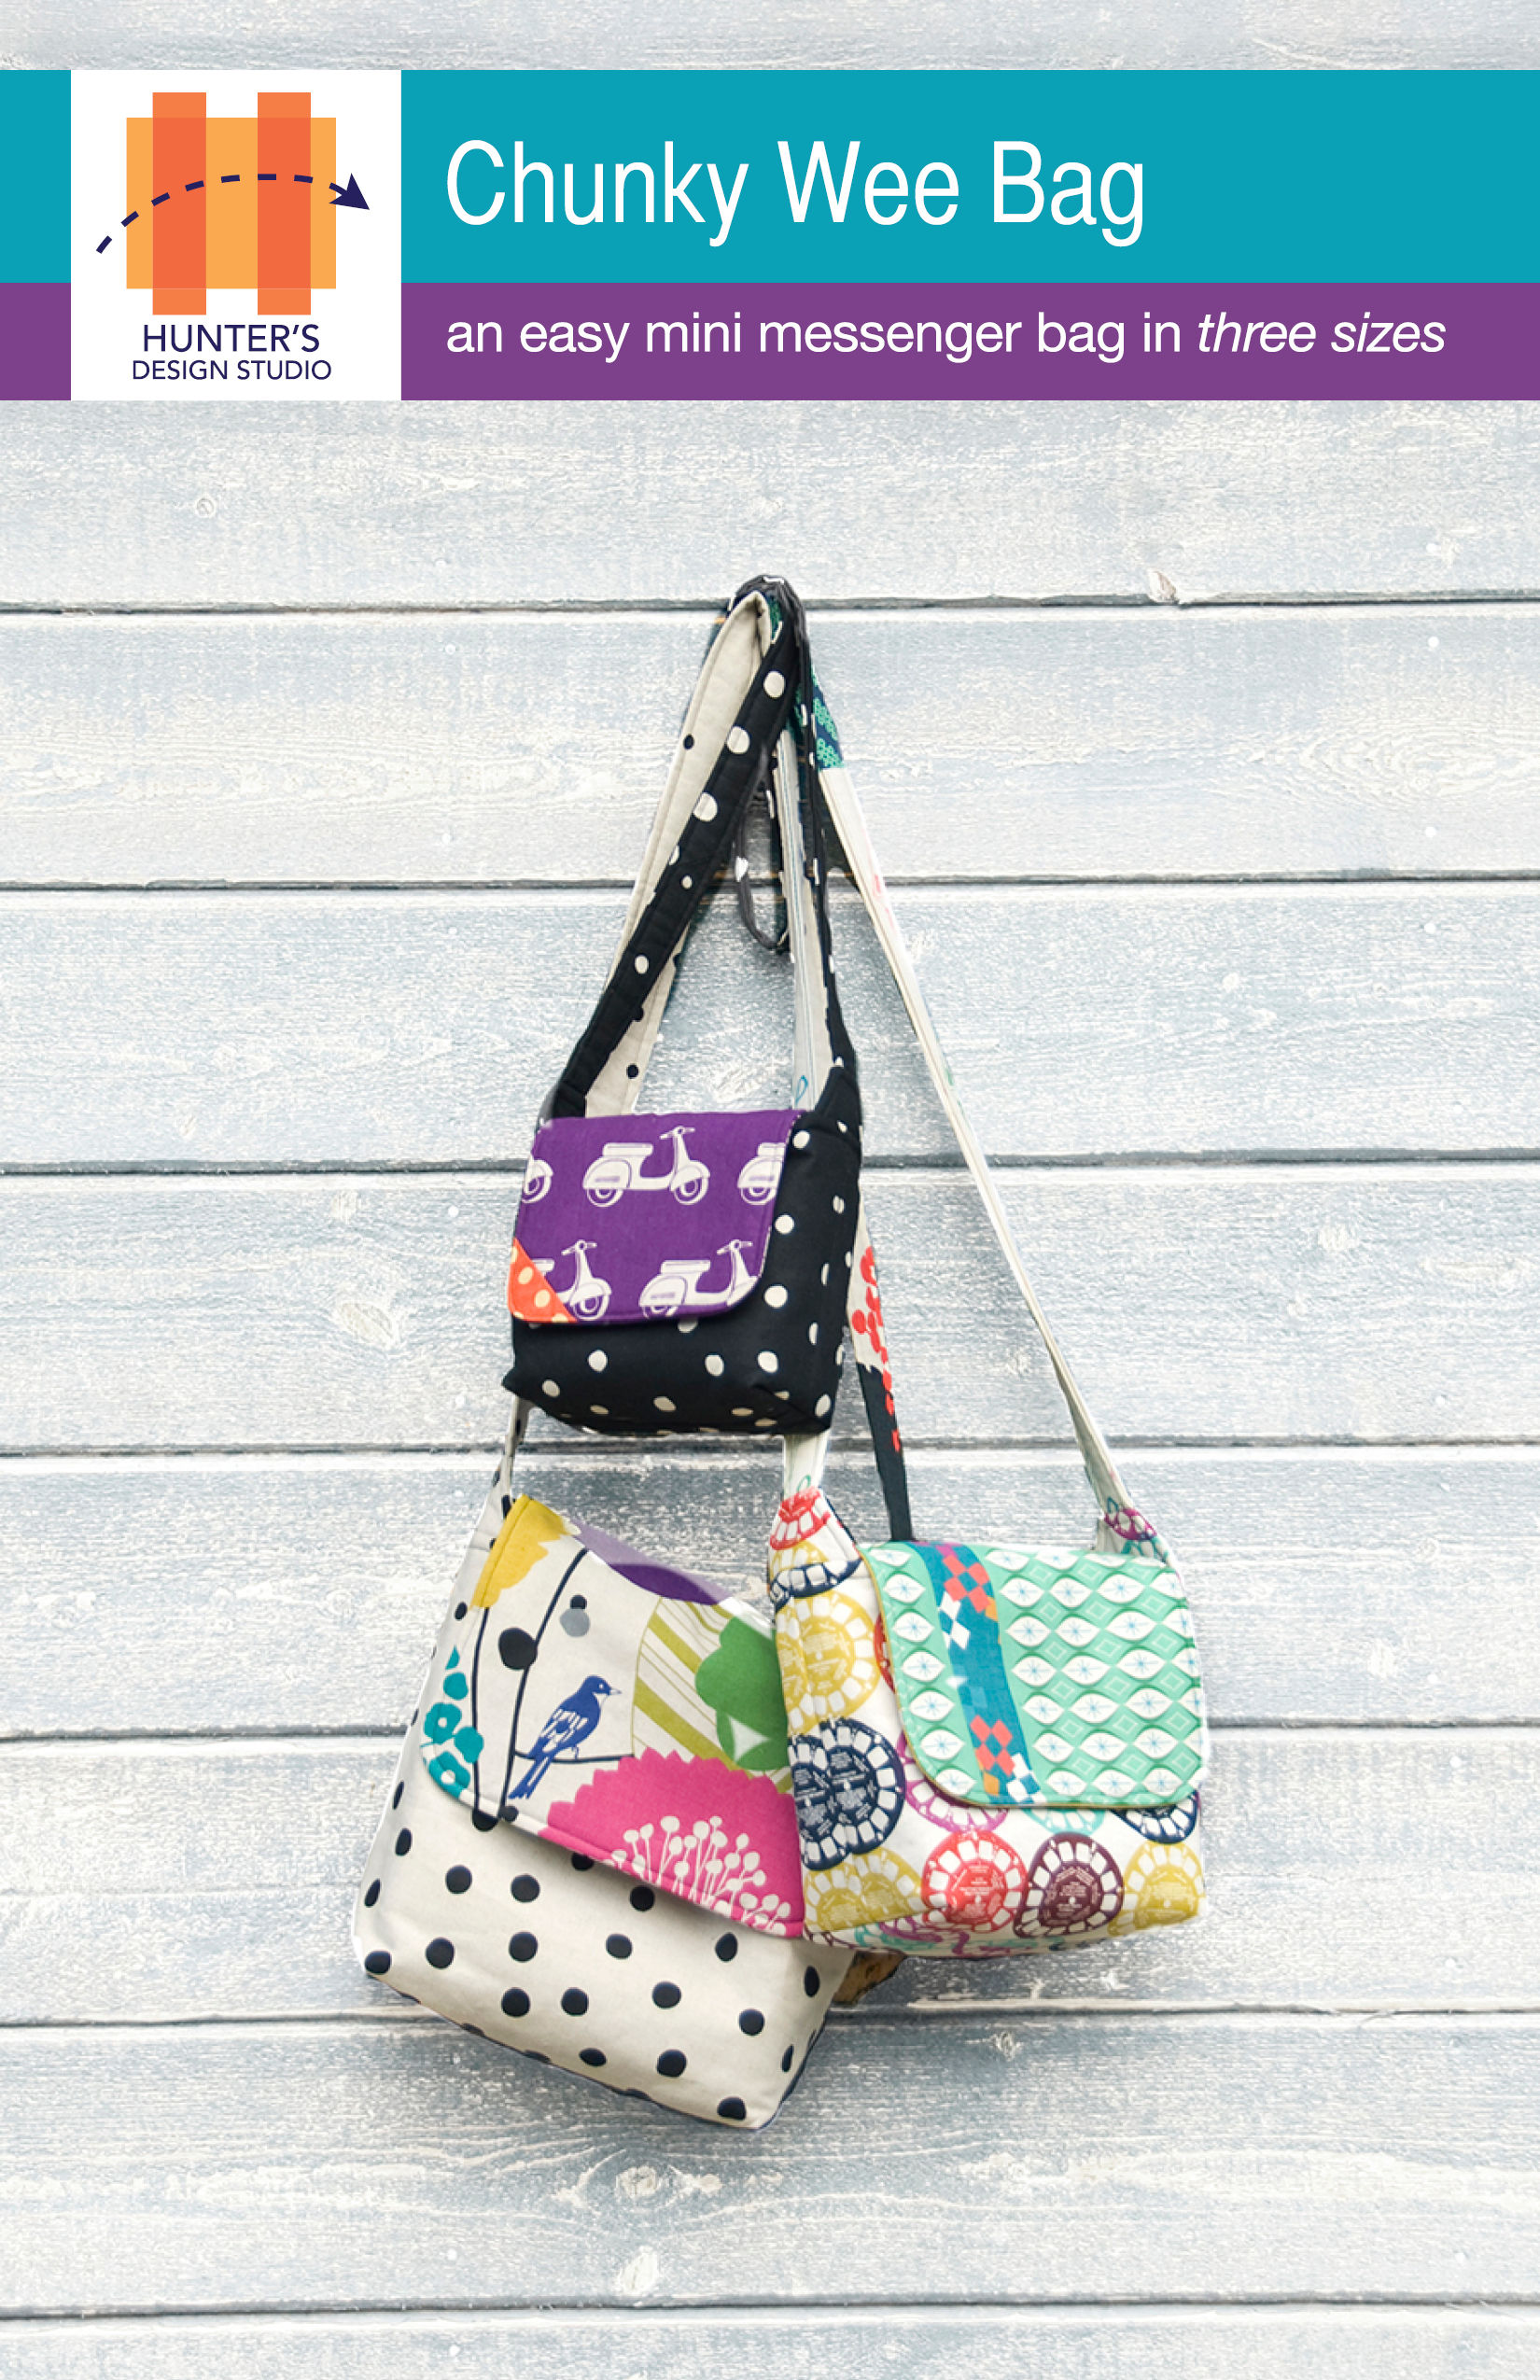 The Ultimate Project Bag- PDF & Video Course - Crafty Gemini